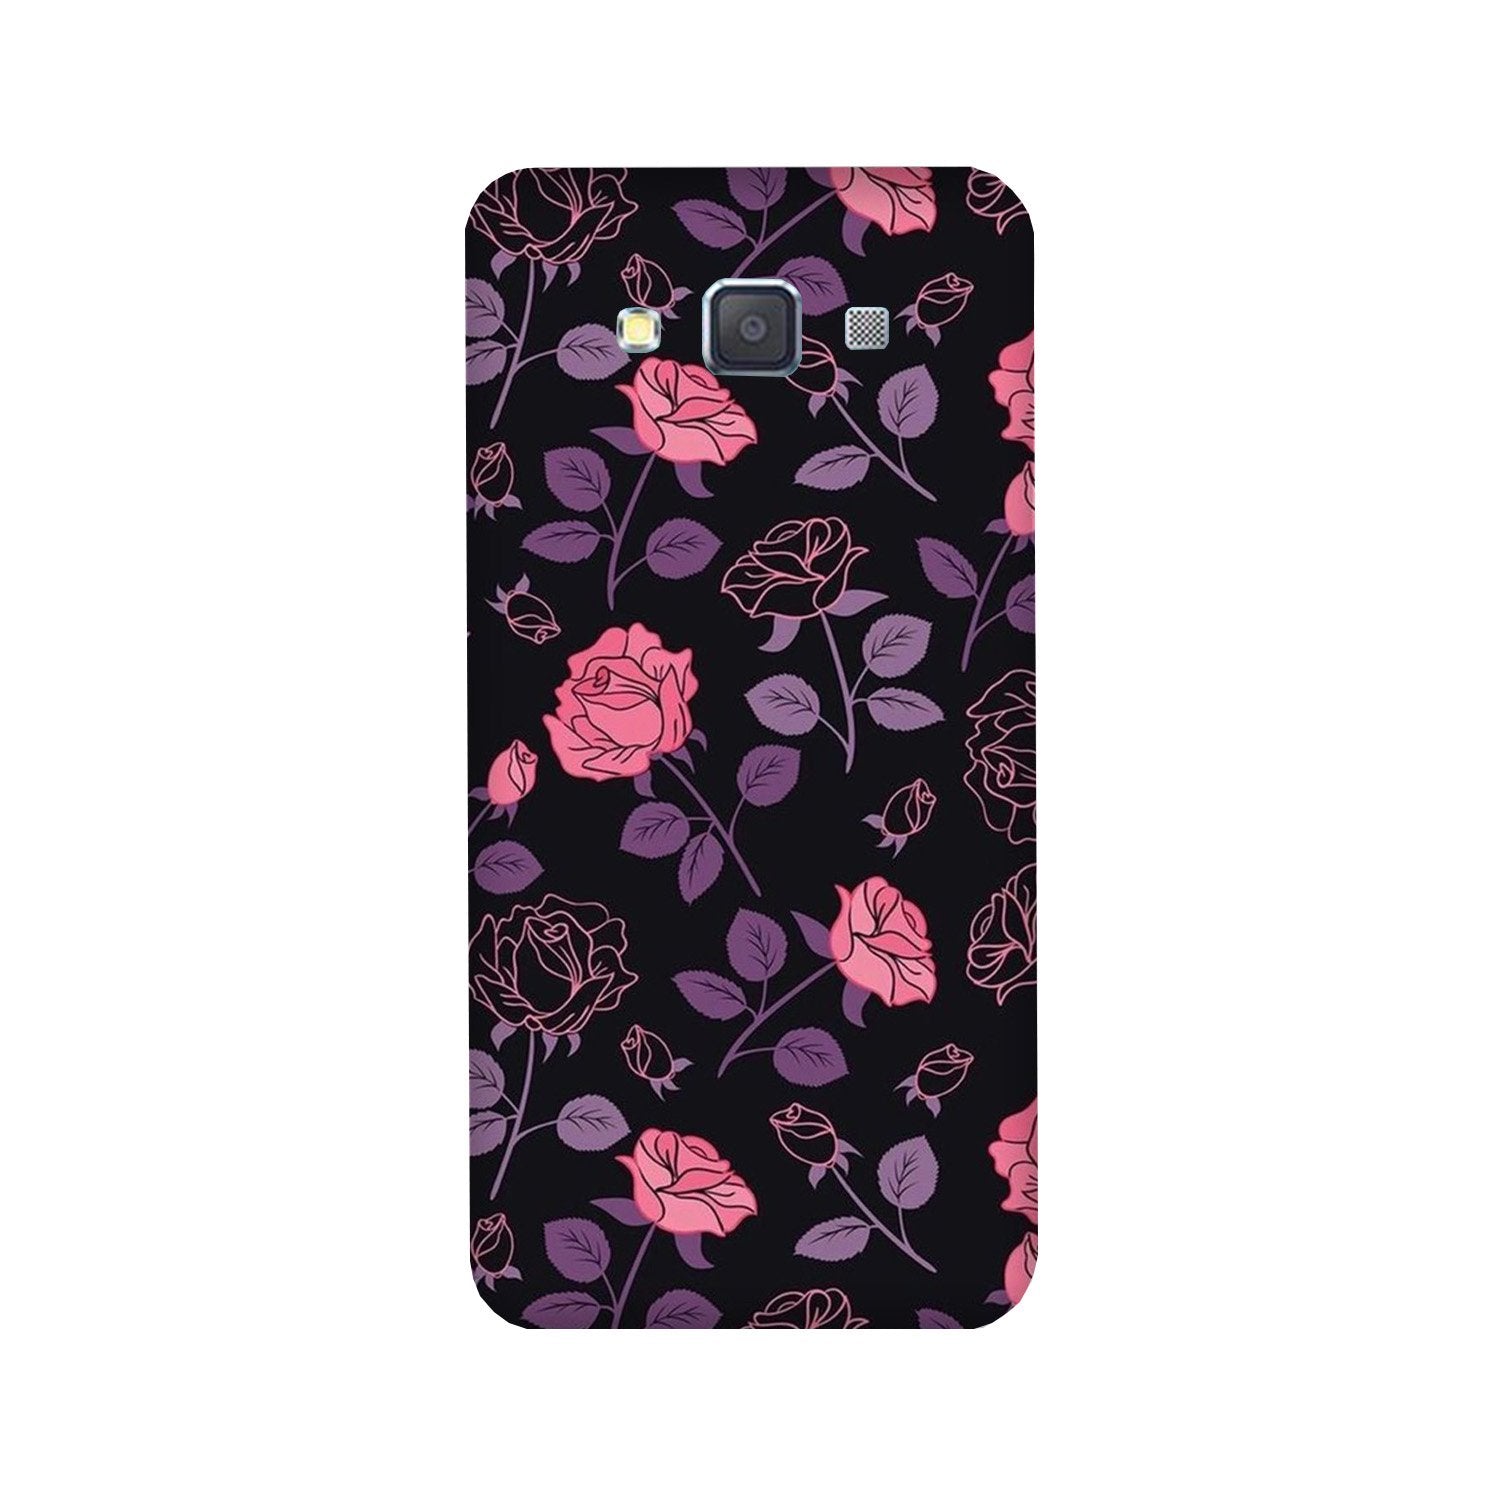 Rose Pattern Case for Galaxy ON7/ON7 Pro